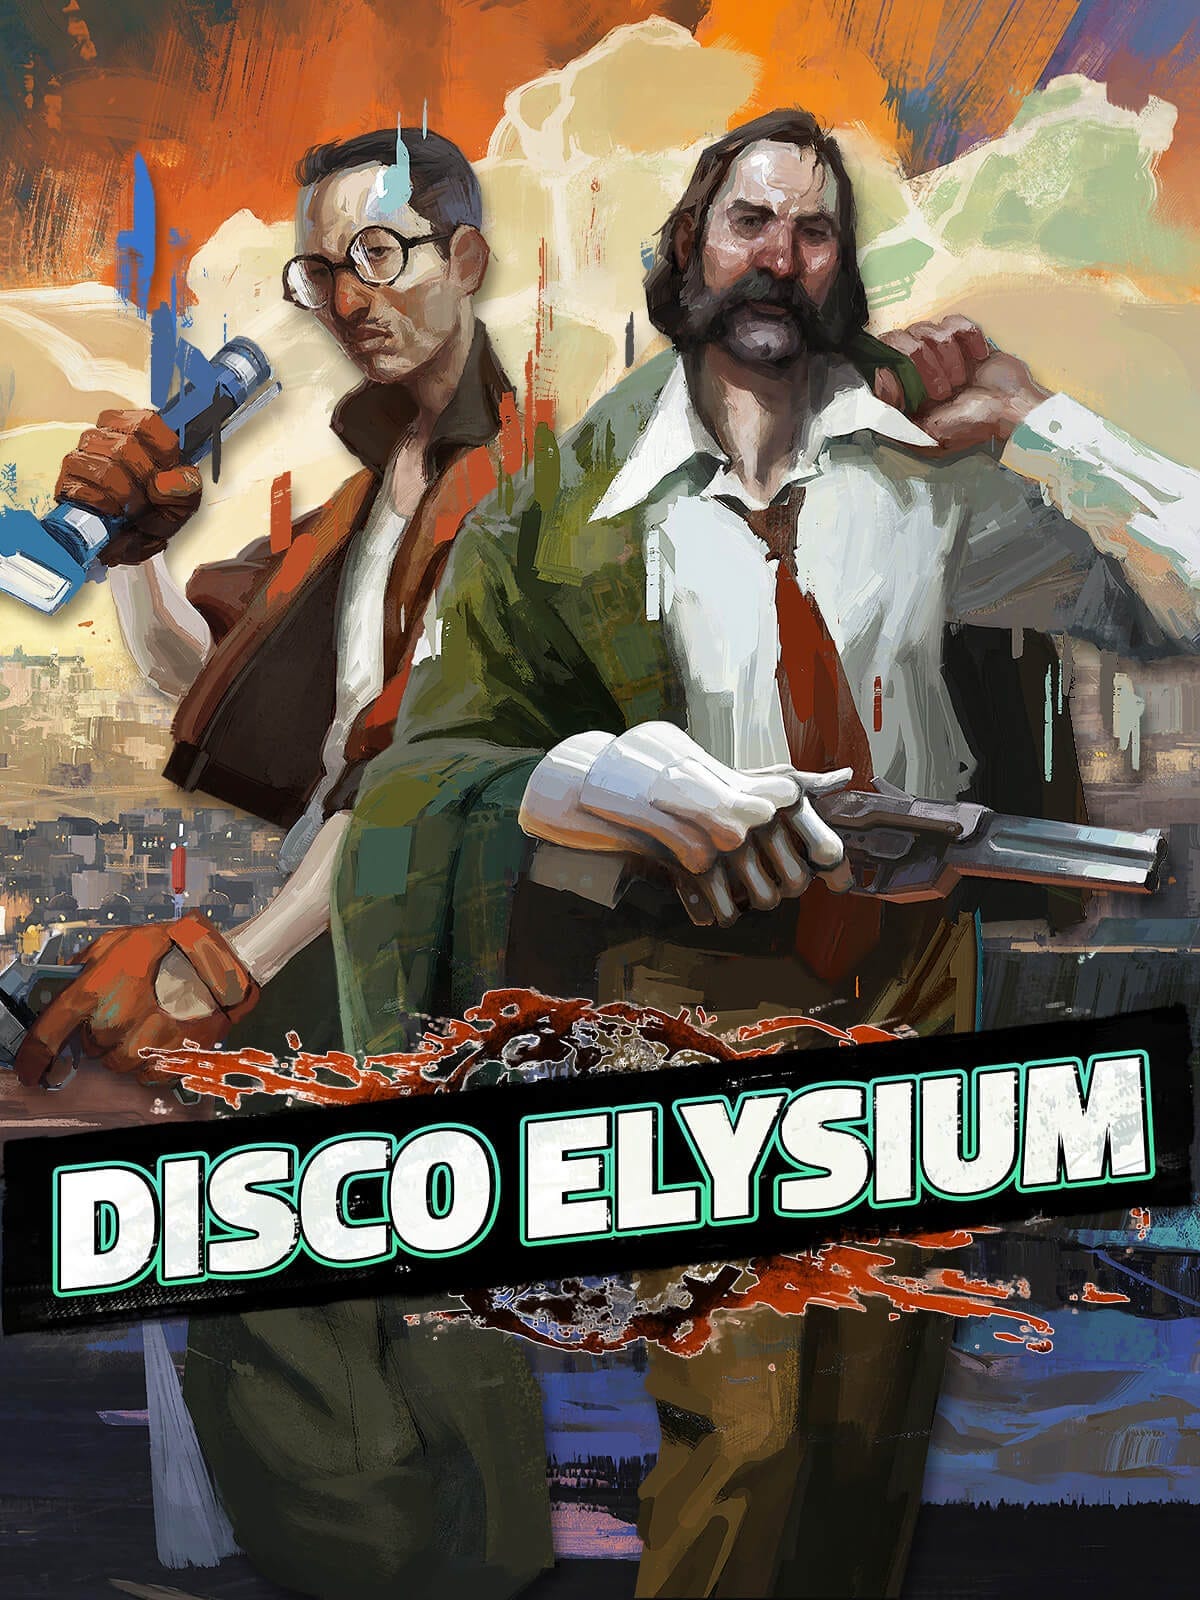 First Look at The Boys Season 2, Disco Elysium TV Series, and more!